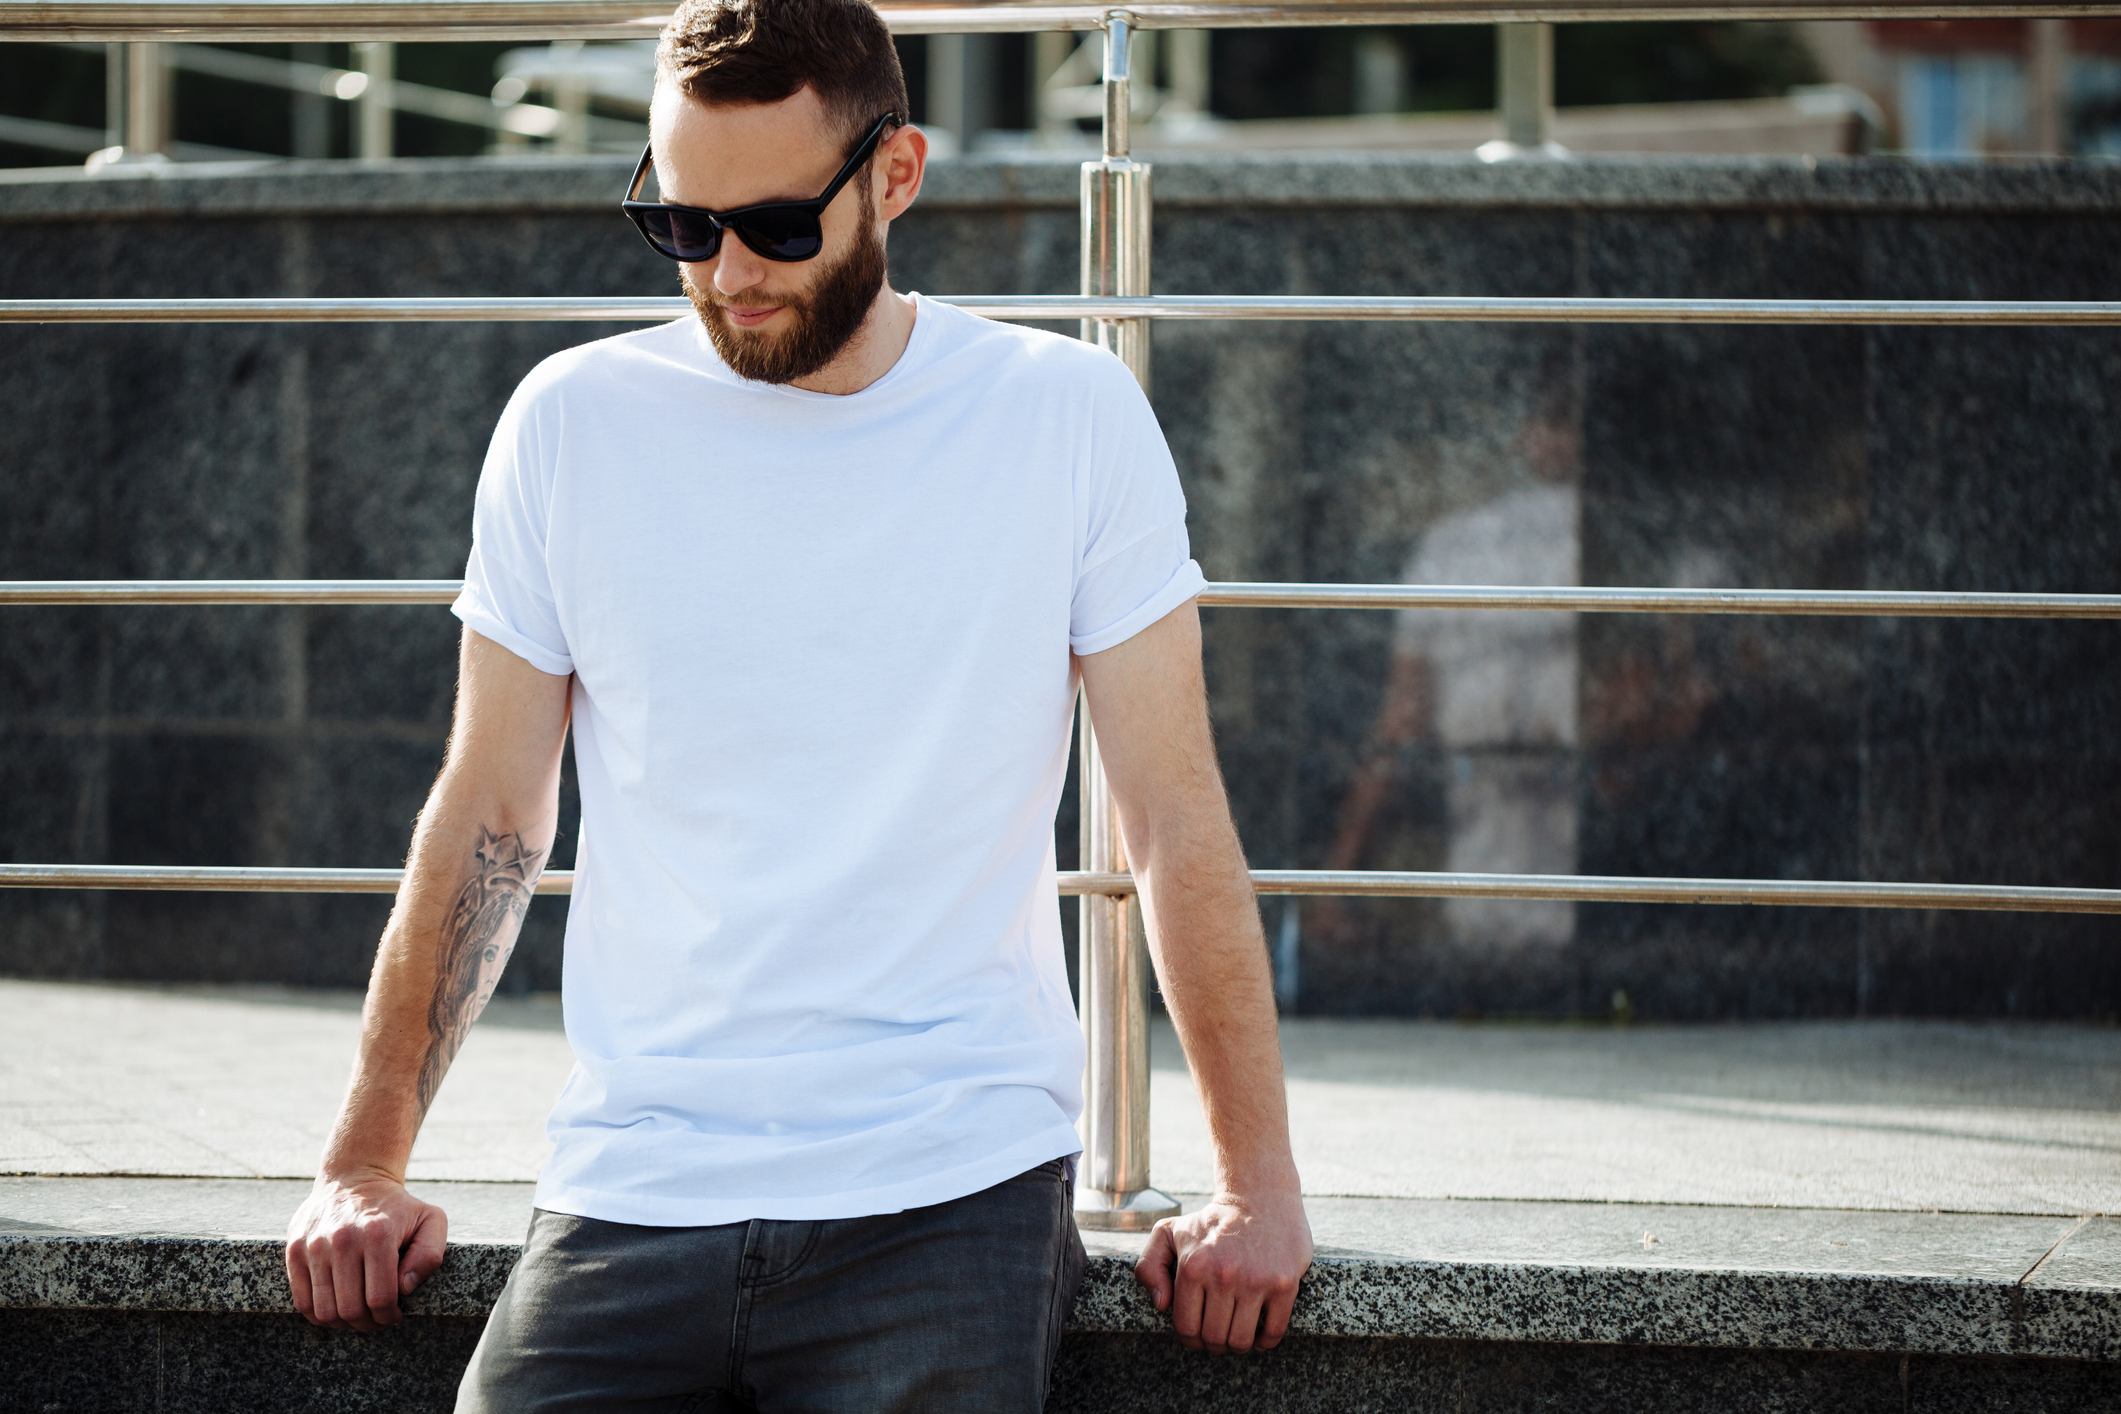 Are White Tees or Black Tees Better in the Sun? Science Weighs In. -  InsideHook